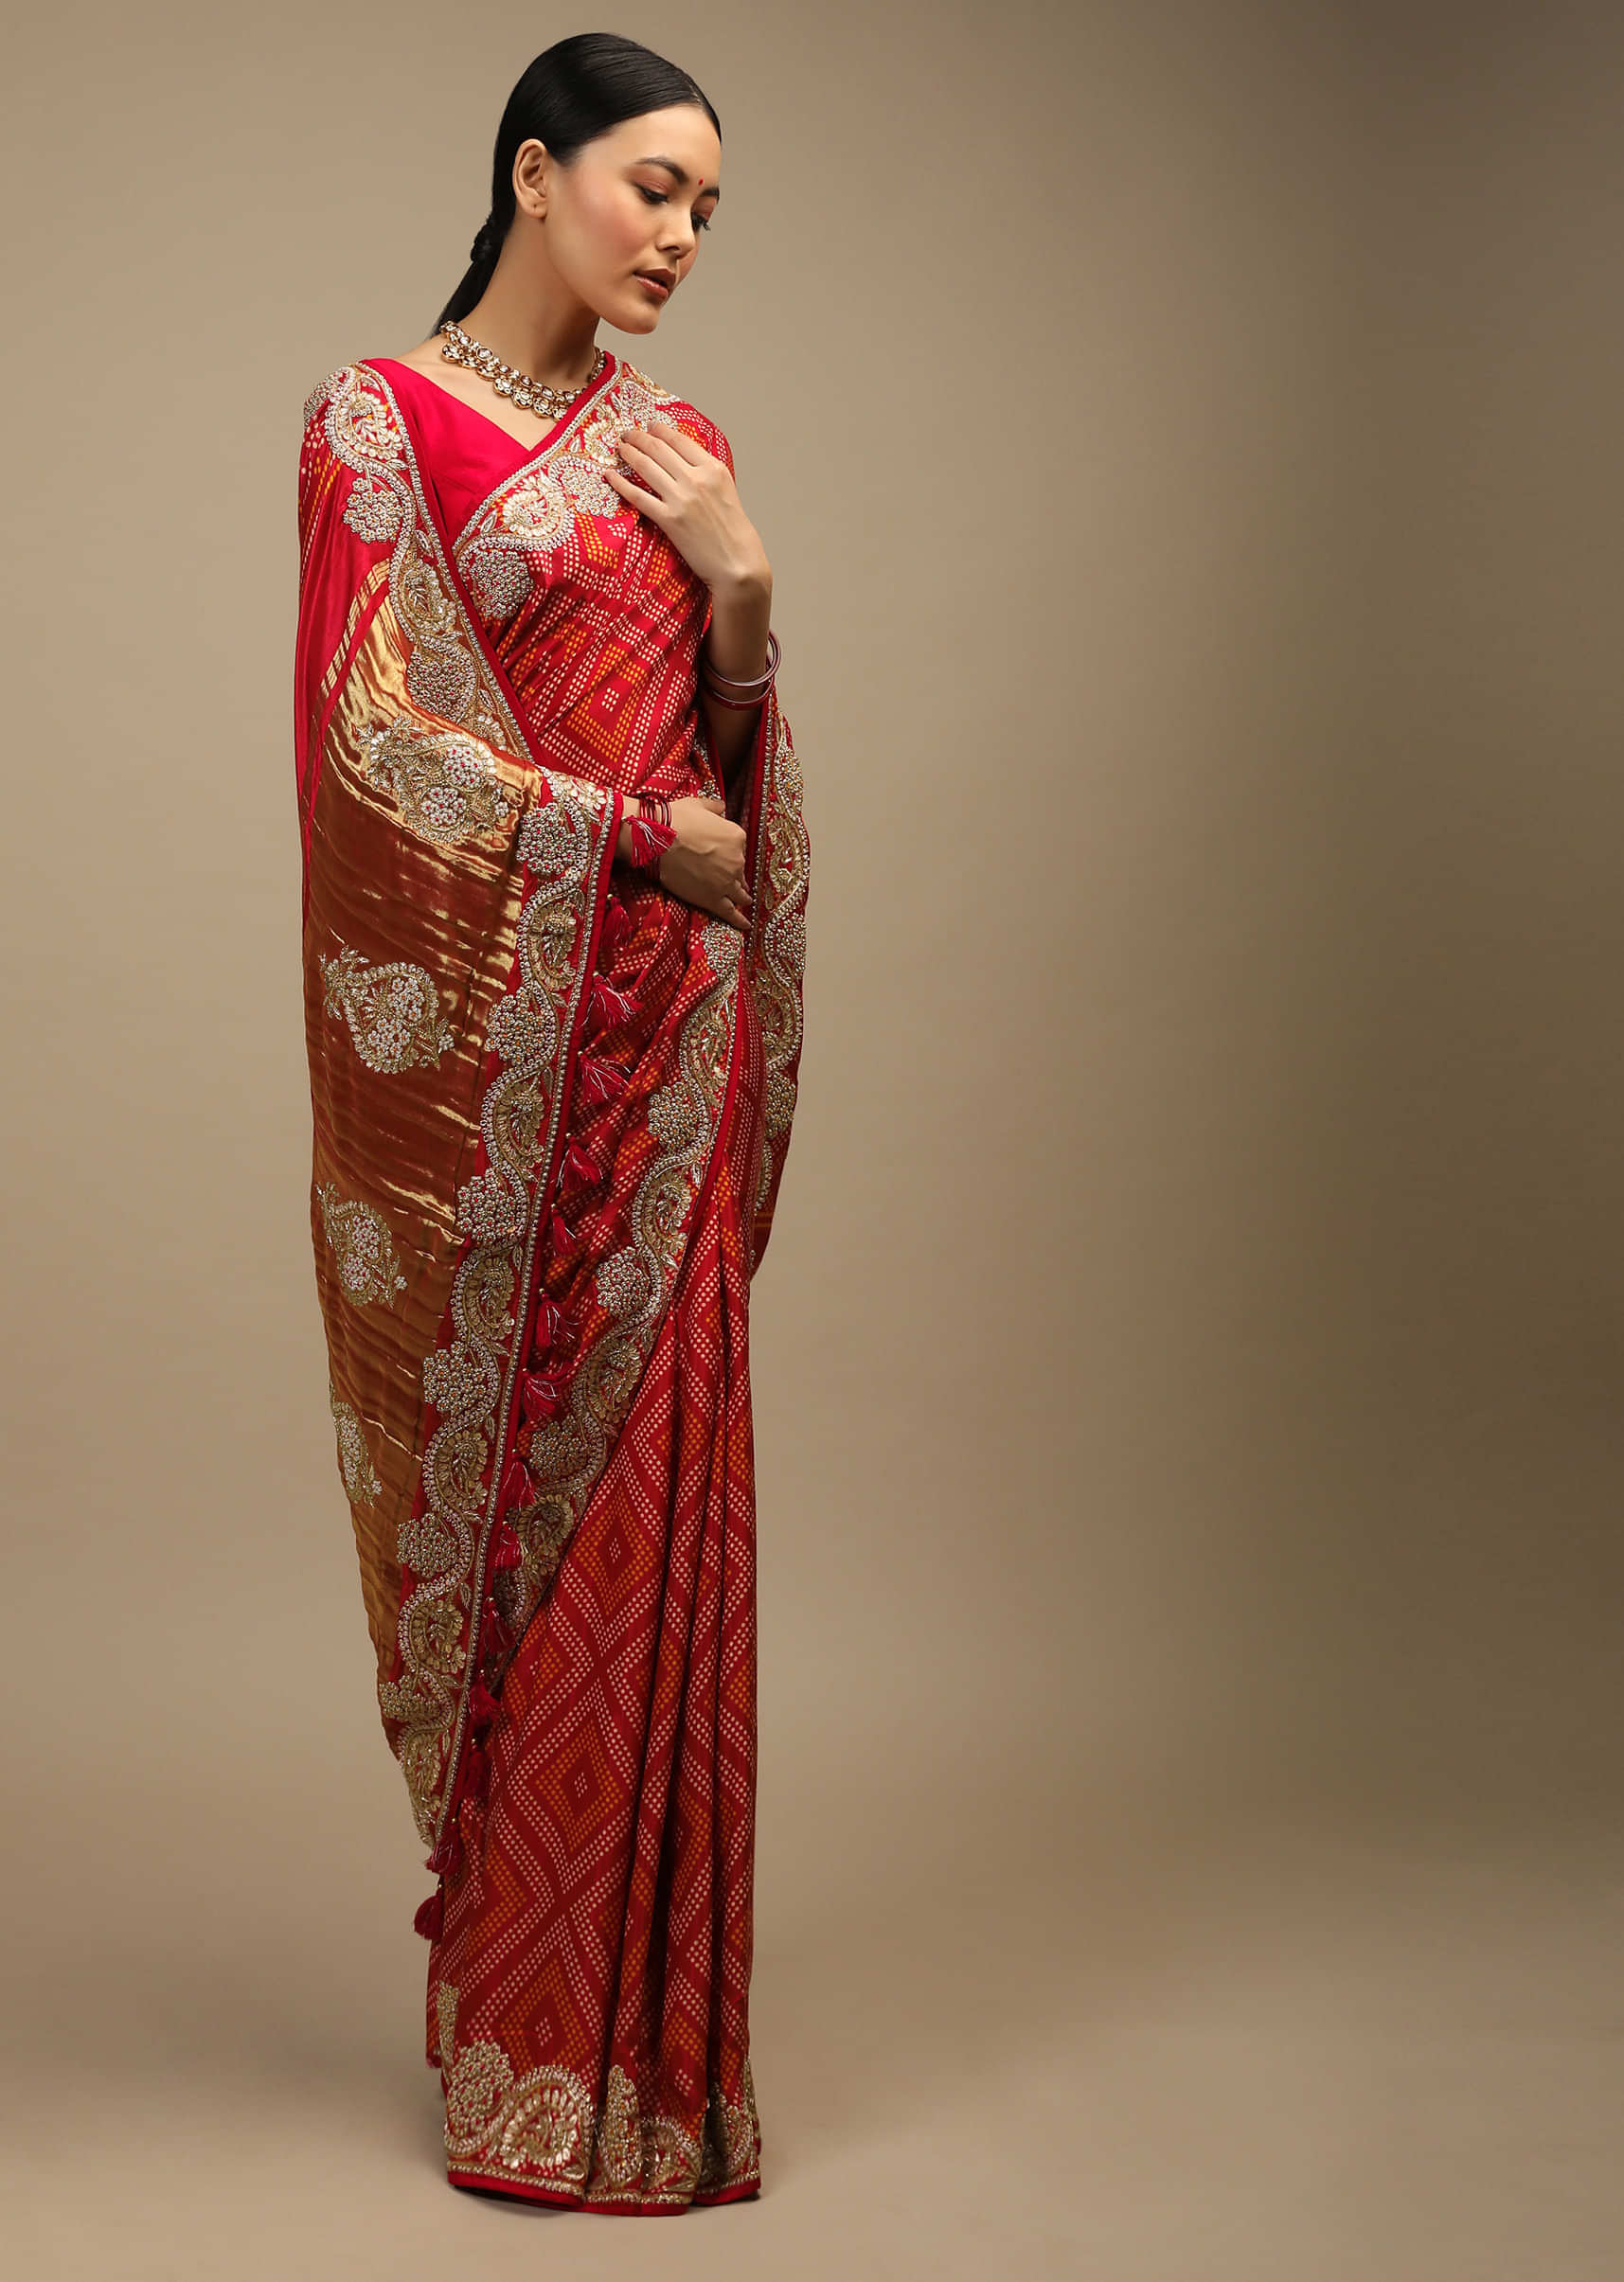 Apple Red Saree In Satin With Dot Print And Brocade Pallu Adorned In Gotta Patti Embroidered Ethnic Motifs Online - Kalki Fashion